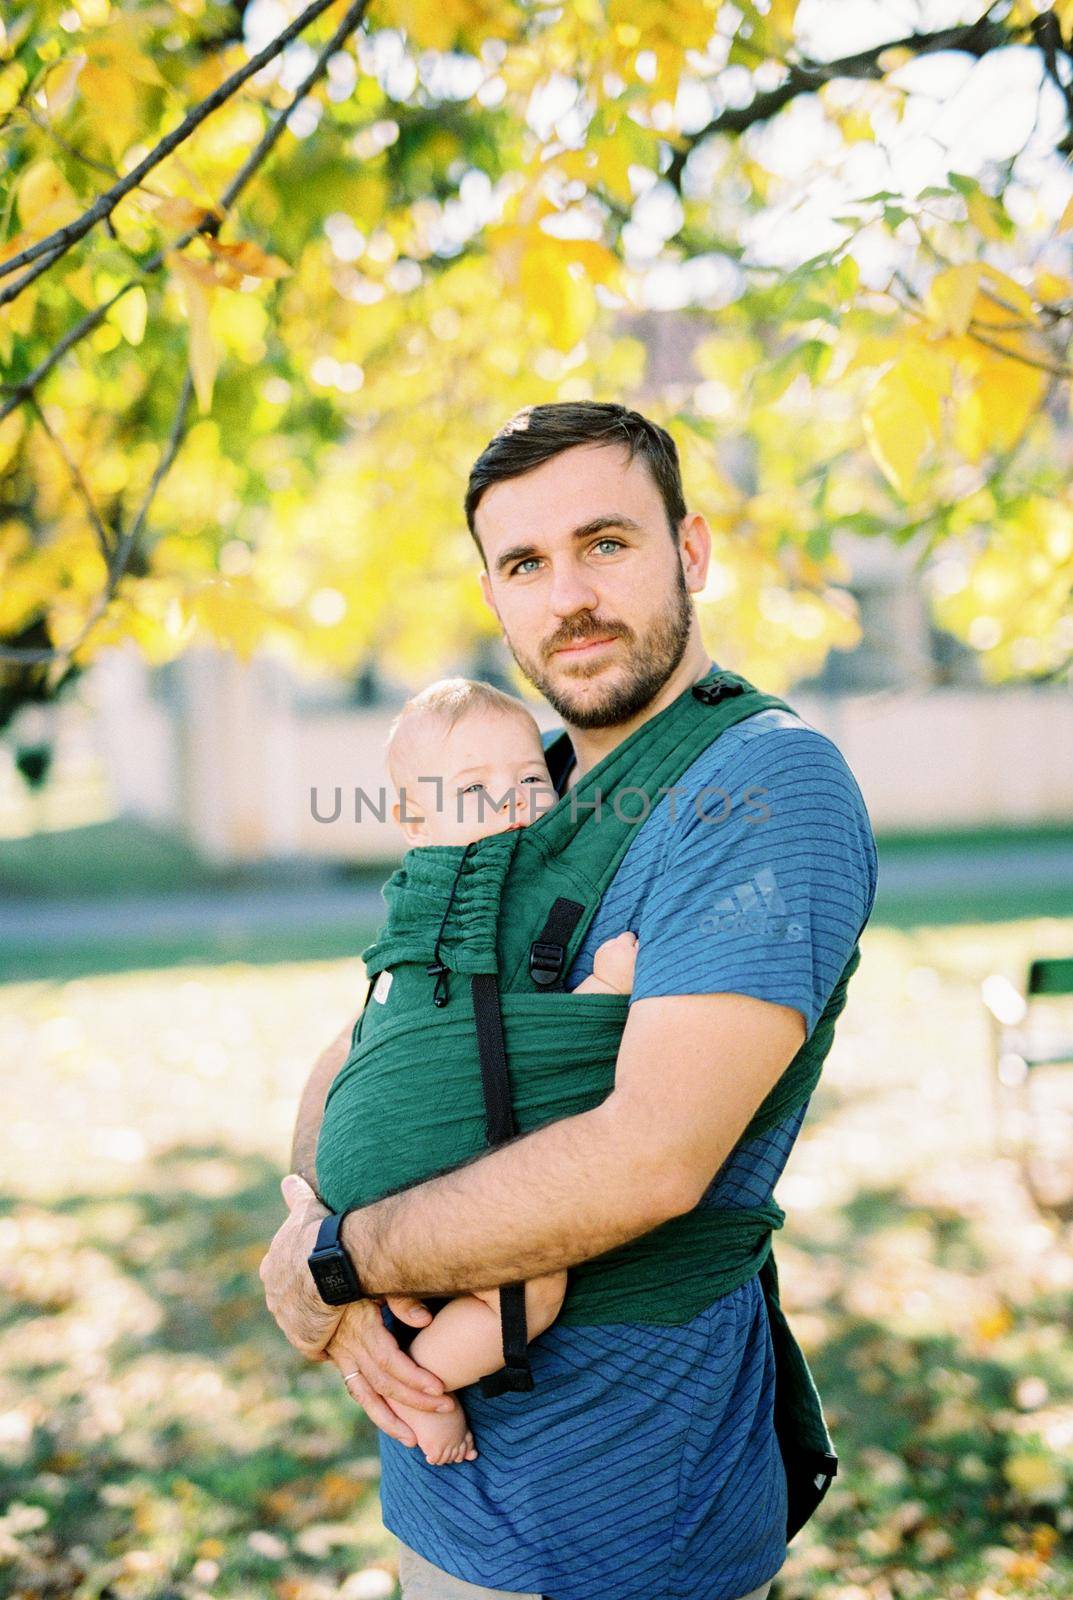 Dad hugging a baby in a sling standing under a tree in the park by Nadtochiy